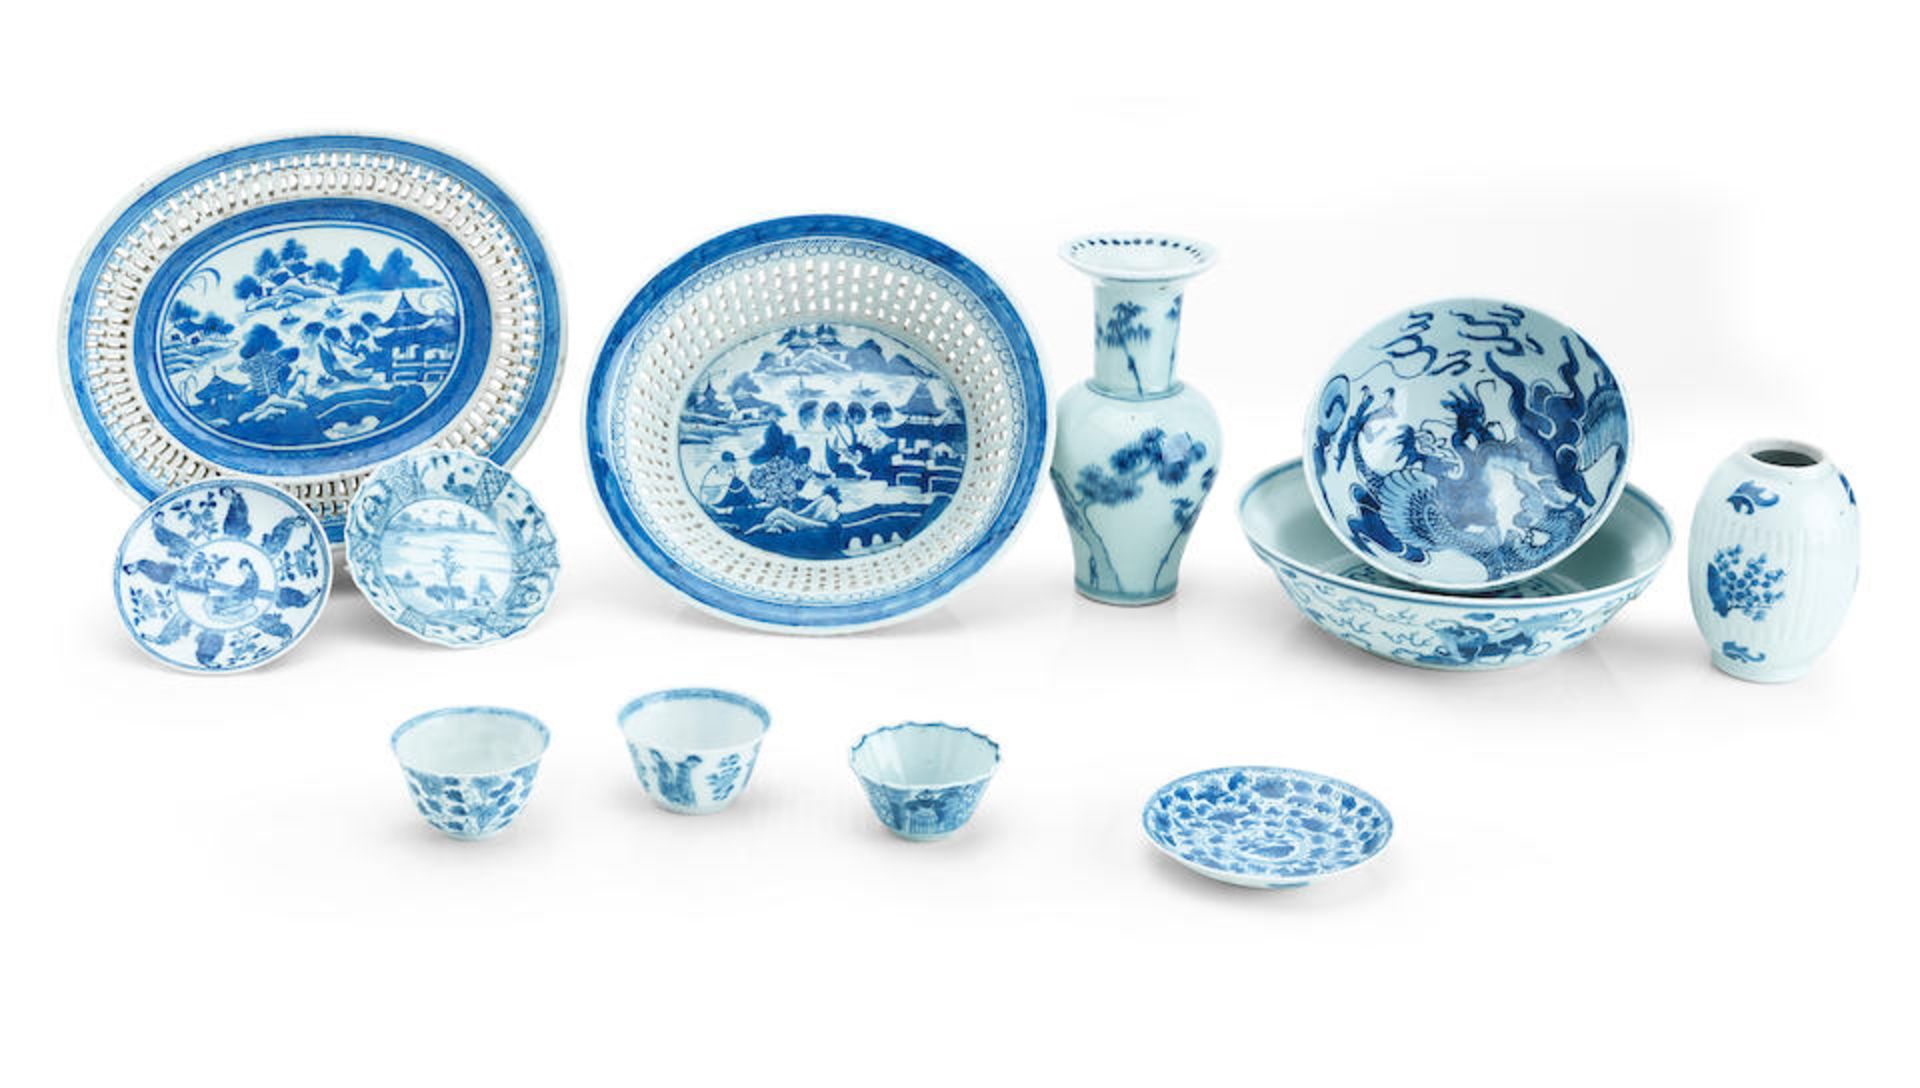 A Collection of Blue and White Porcelains 18th/19th Century (12)